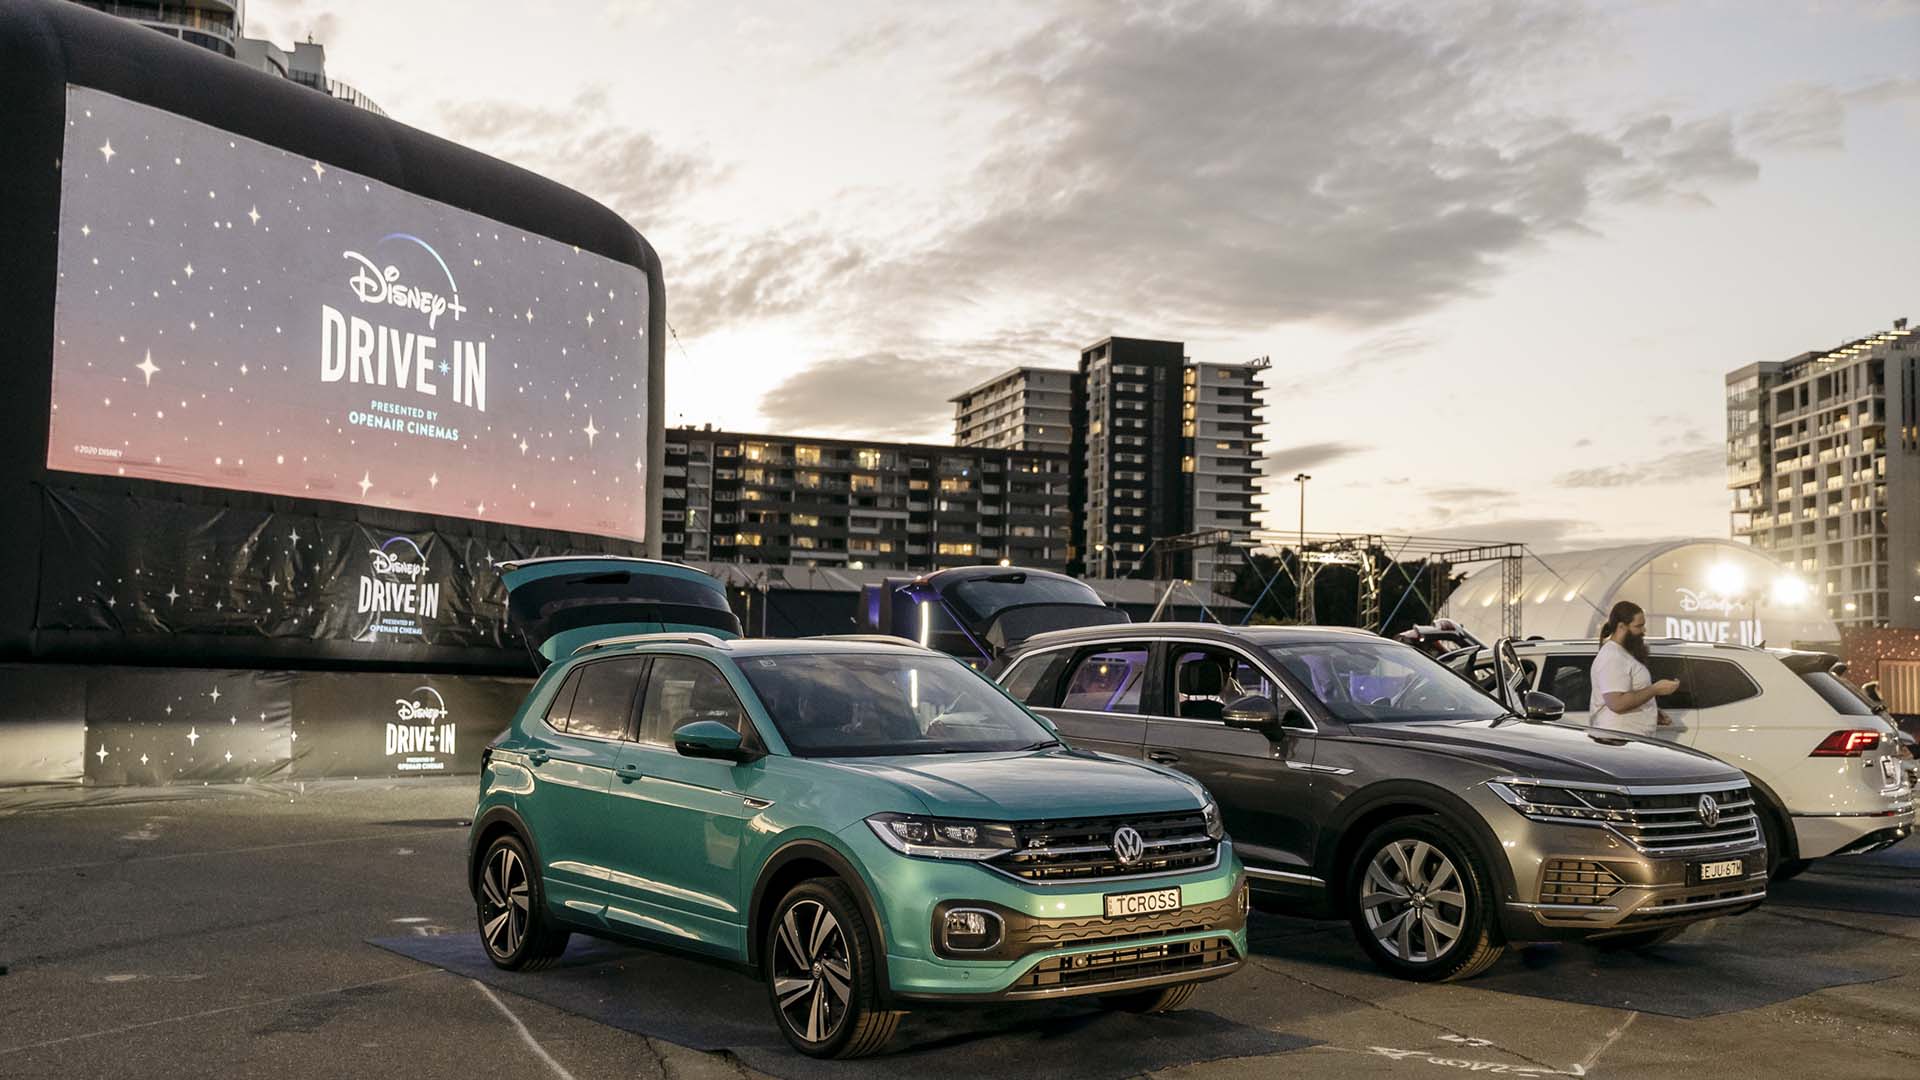 The Best Outdoor and Drive-In Cinemas to Check Out in Sydney